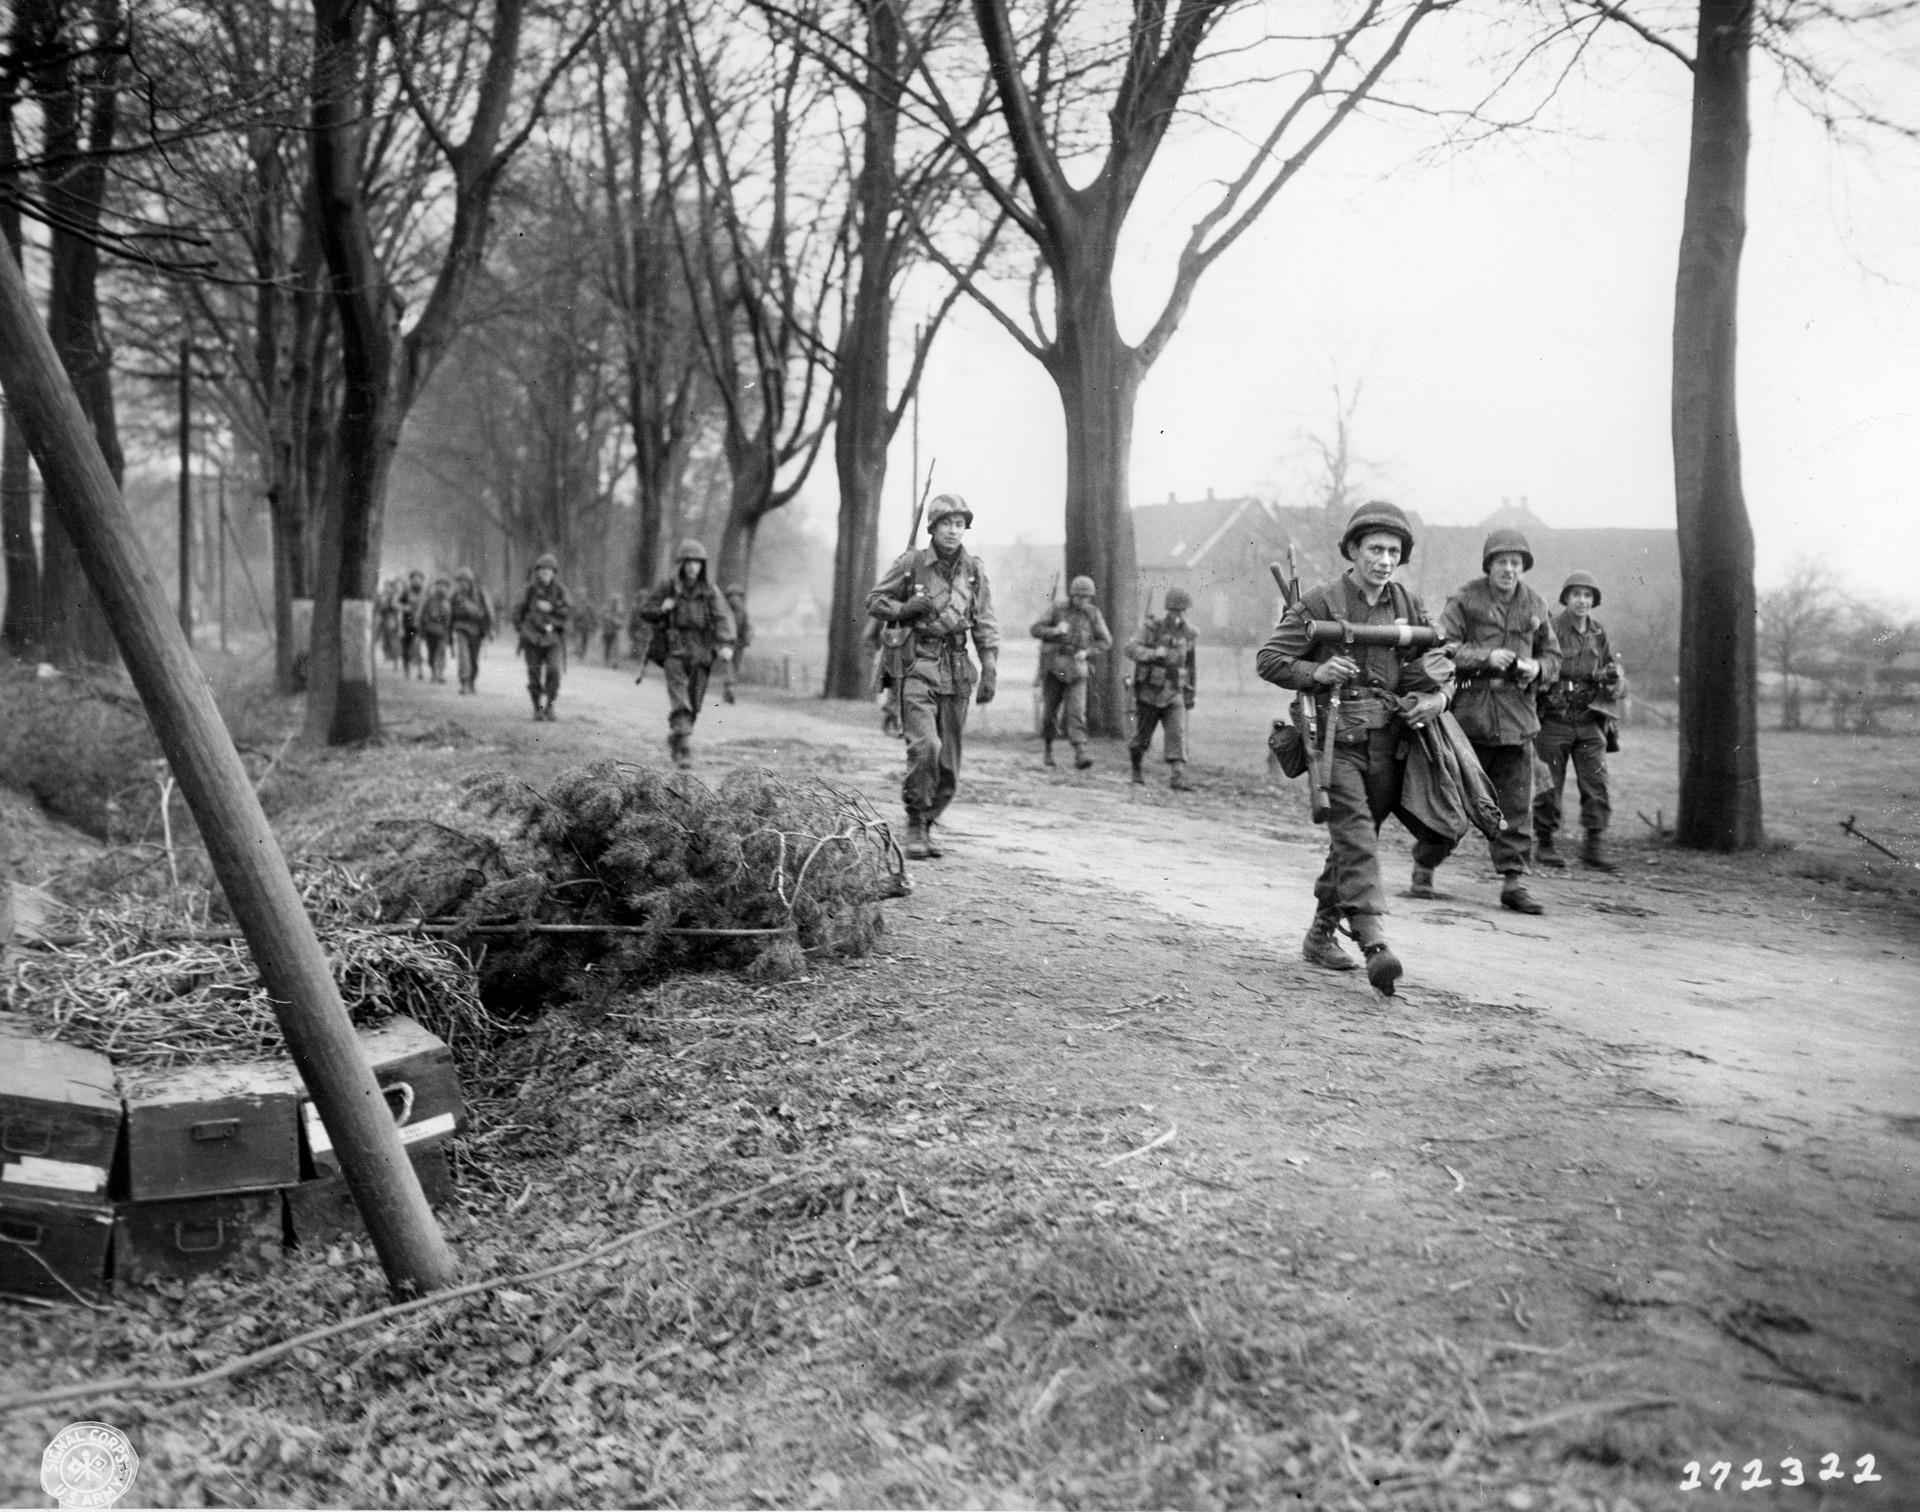 After crossing the Rhine River, the soldiers of the 75th Infantry moved more freely across Germany. Bush was scouting ahead of his company when he learned the war had ended. 